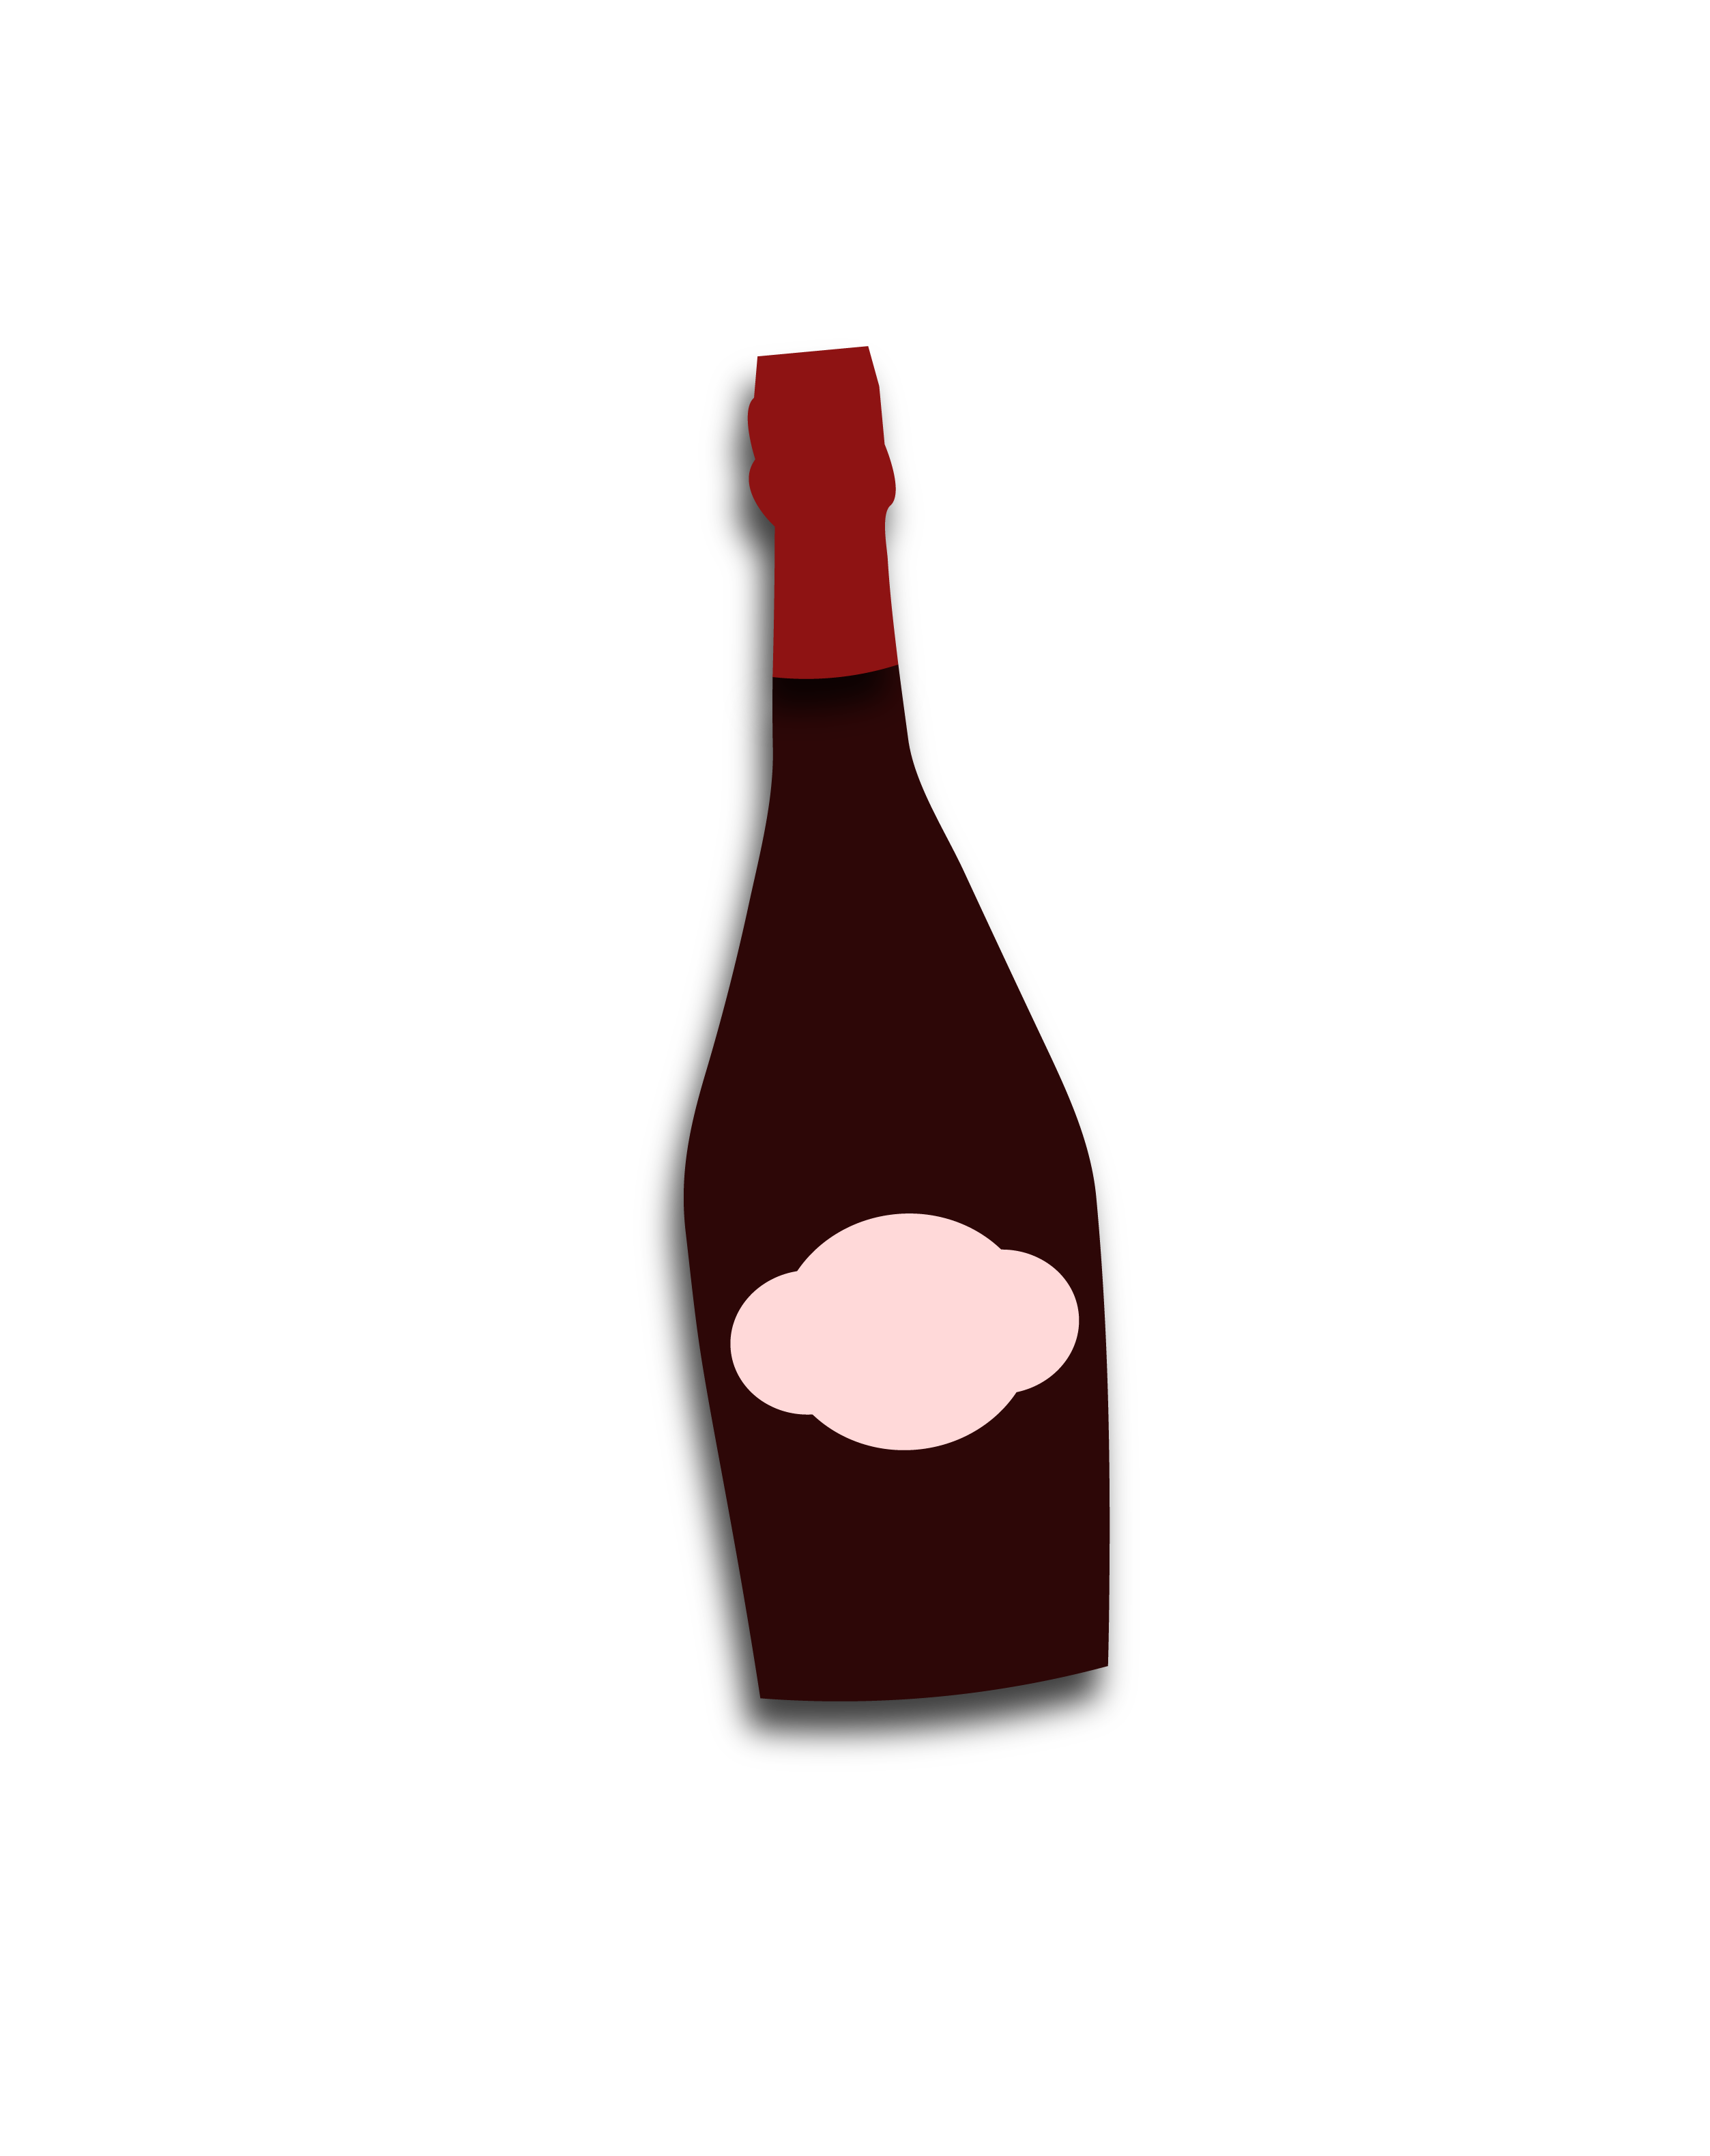 Graphic of red wine bottle